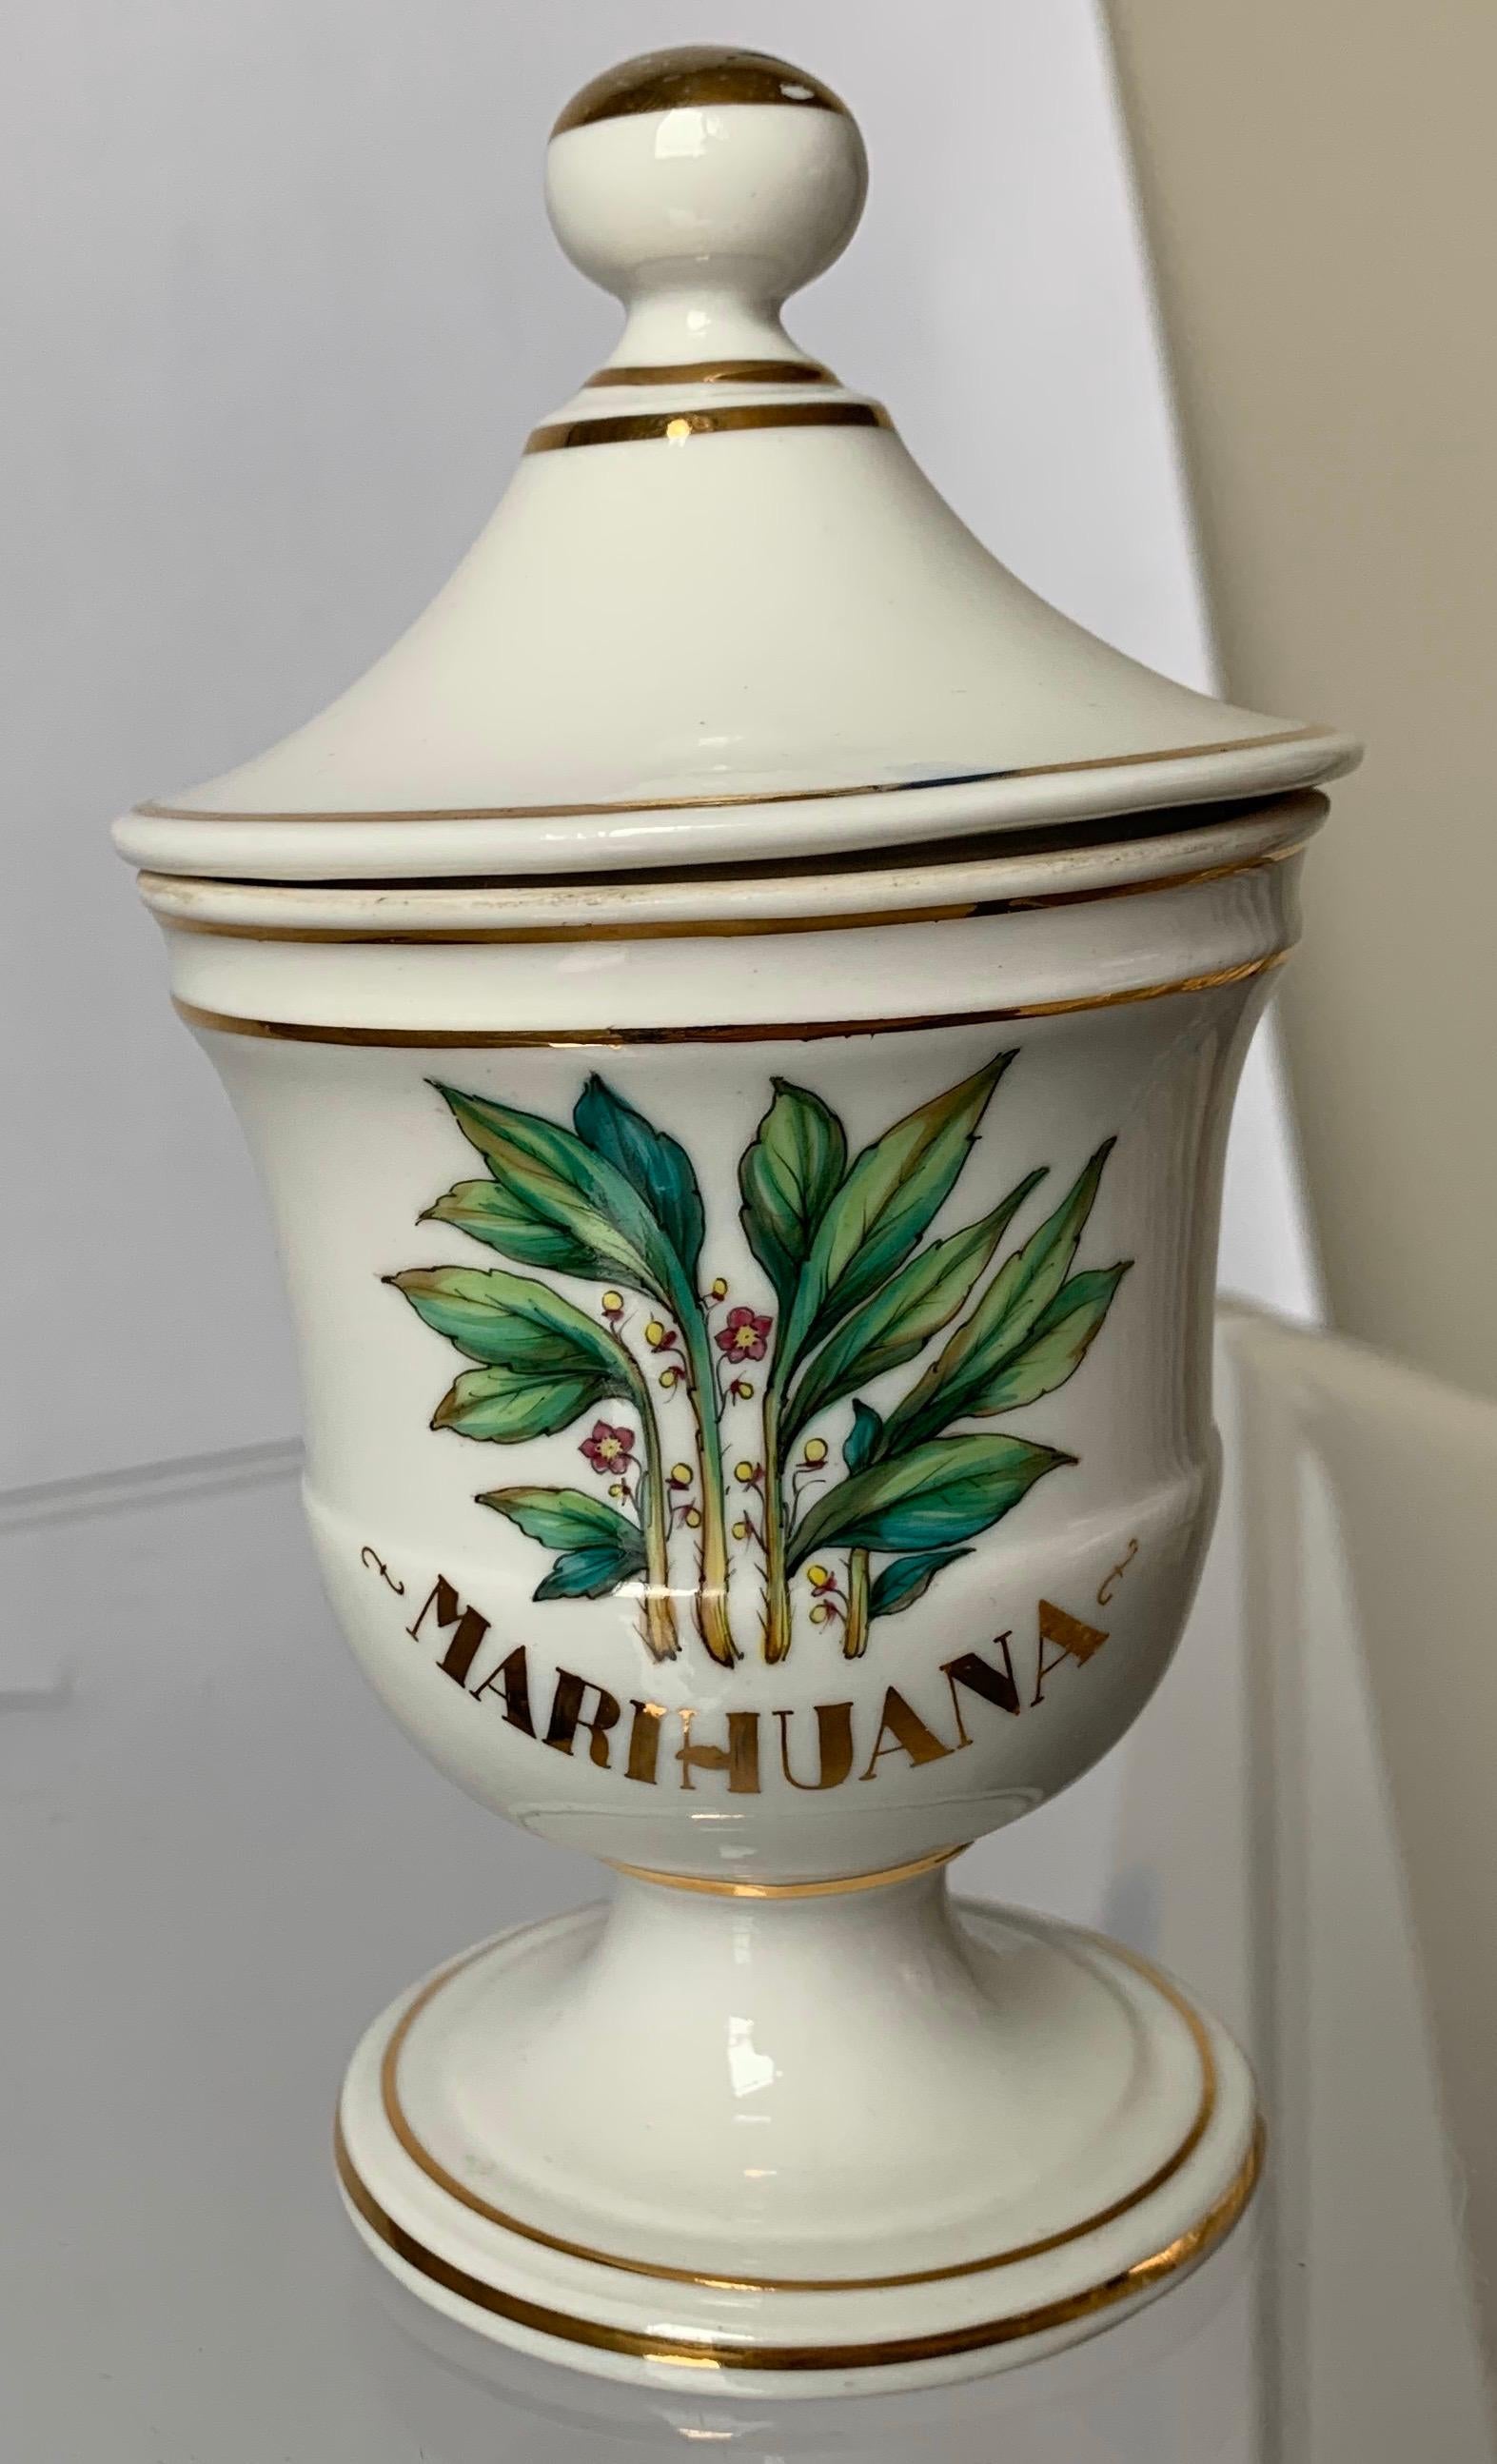 French Provincial Limoges Marihuana Gold Rimmed Apothecary Jar